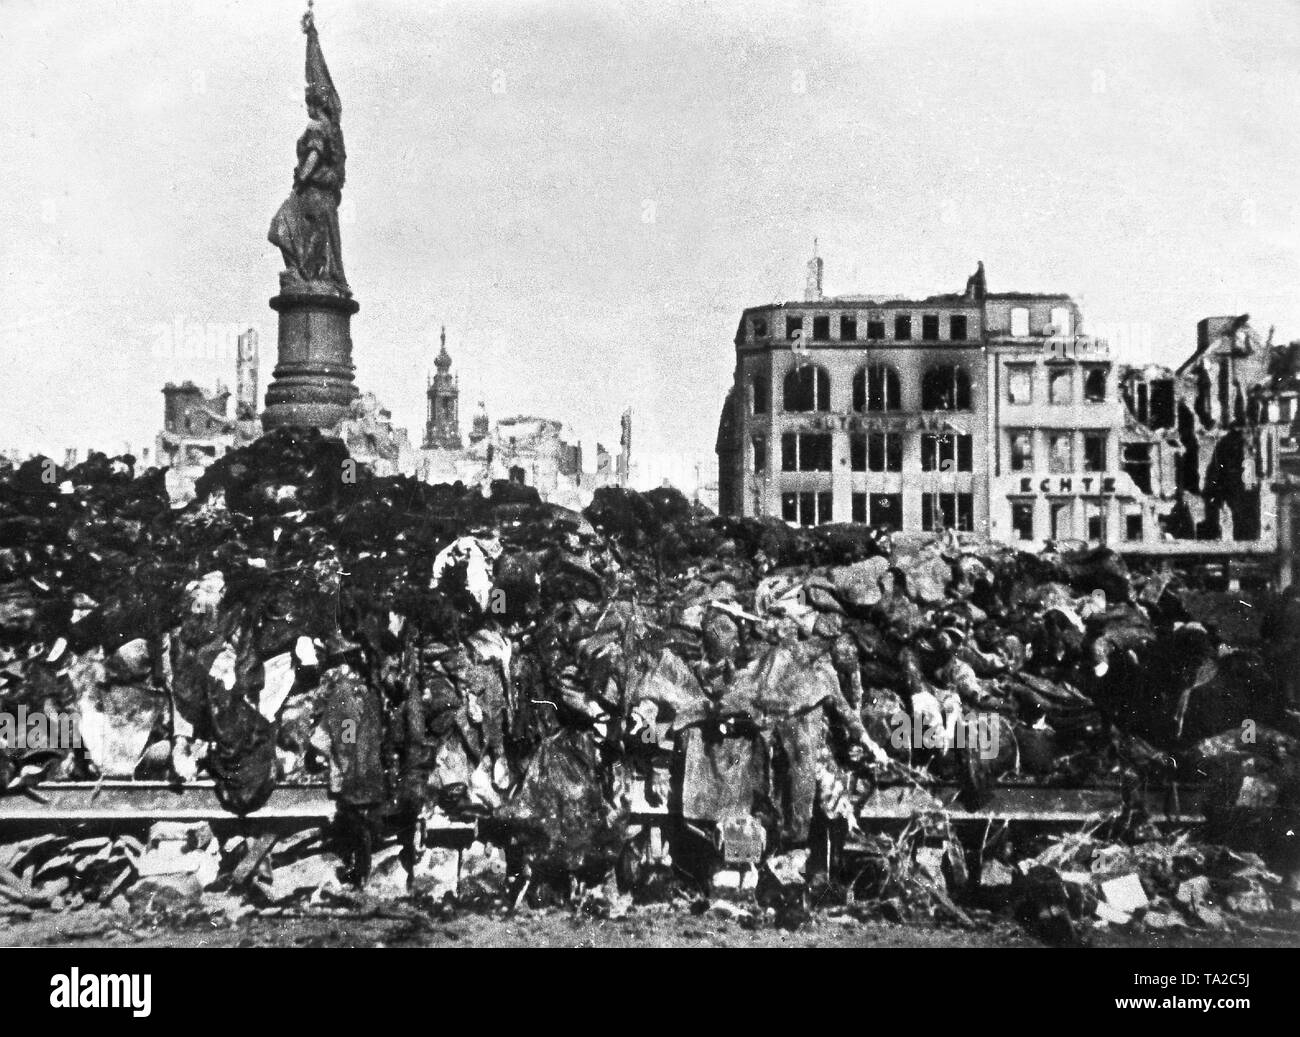 Dead bodies piled up to be burned following the Allied Bombing of Dresden, 13th -15th February 1945 (b/w photo). c. 30,000 civilians were killed during the British air raid in February 1945, Stock Photo